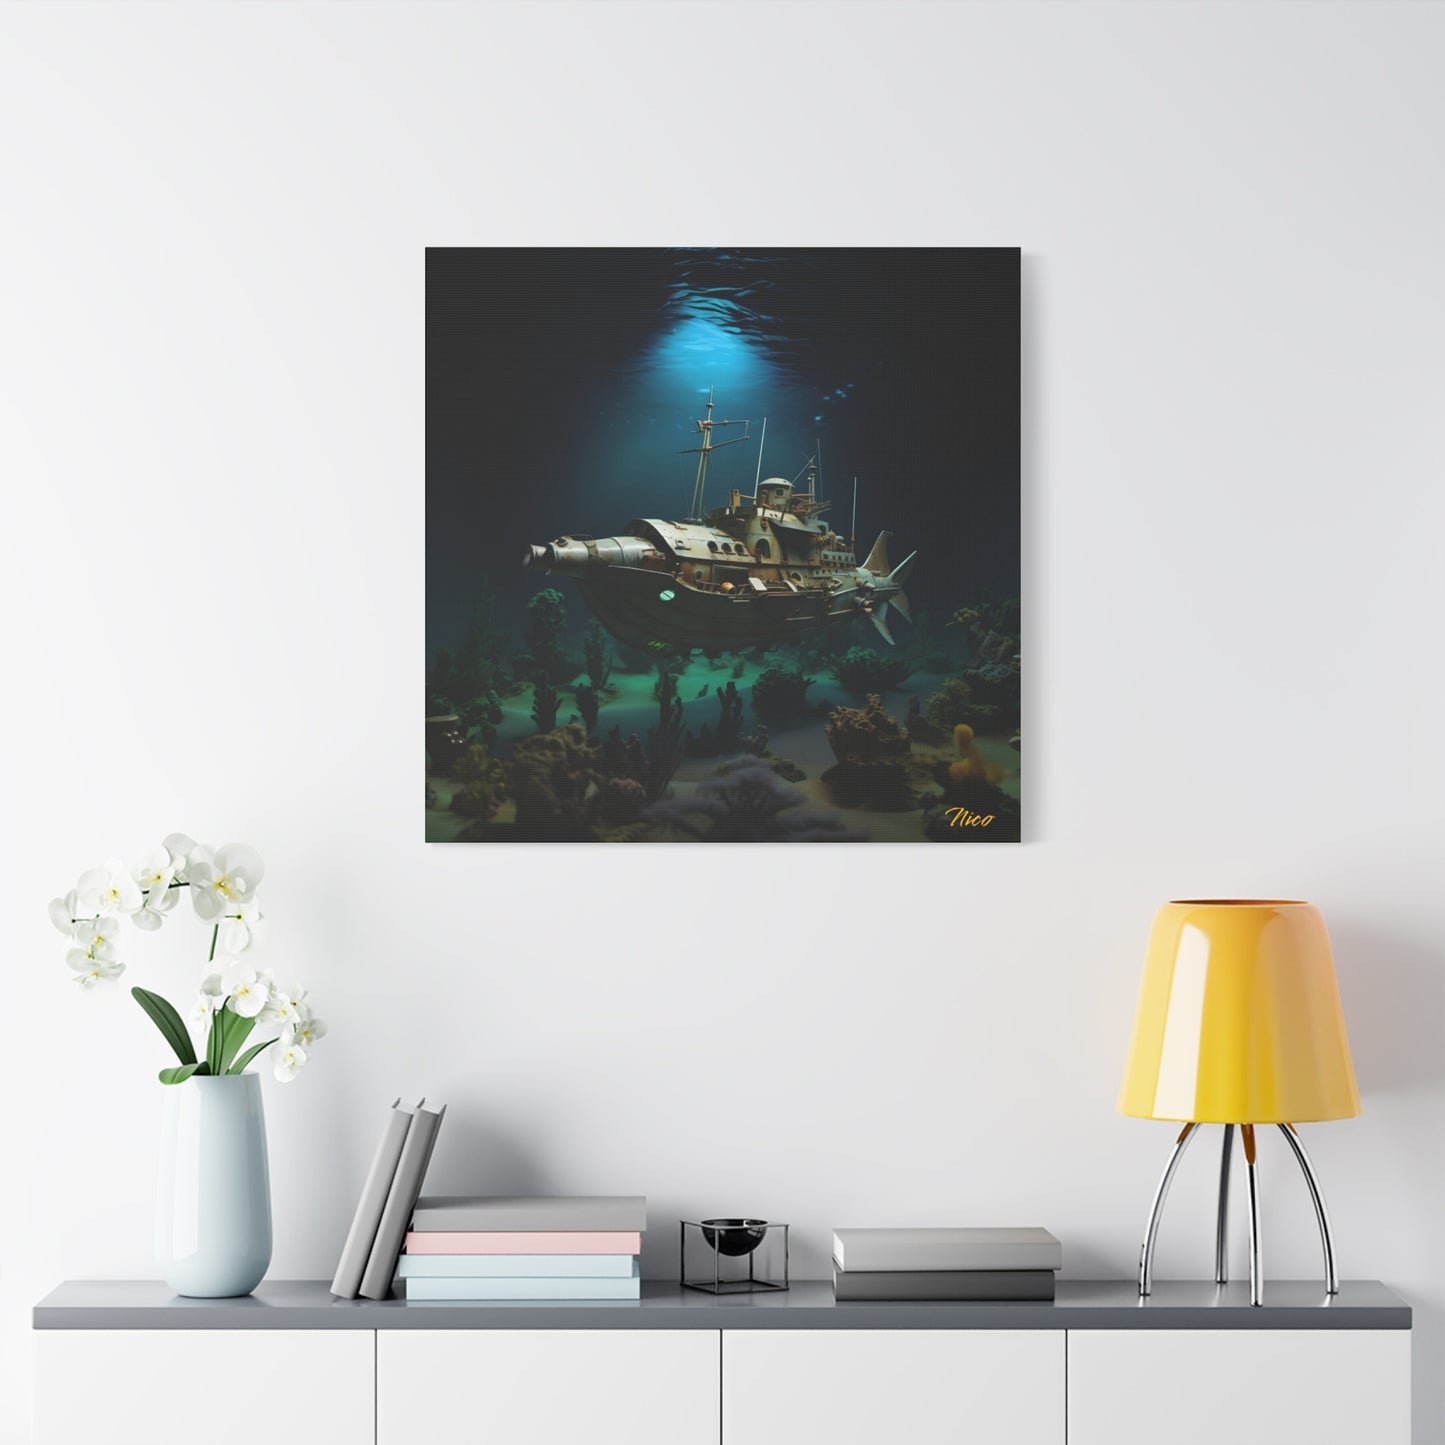 20,000 Leagues Under The Sea Series Print #7 - Streched Matte Canvas Print, 1.25" Thick